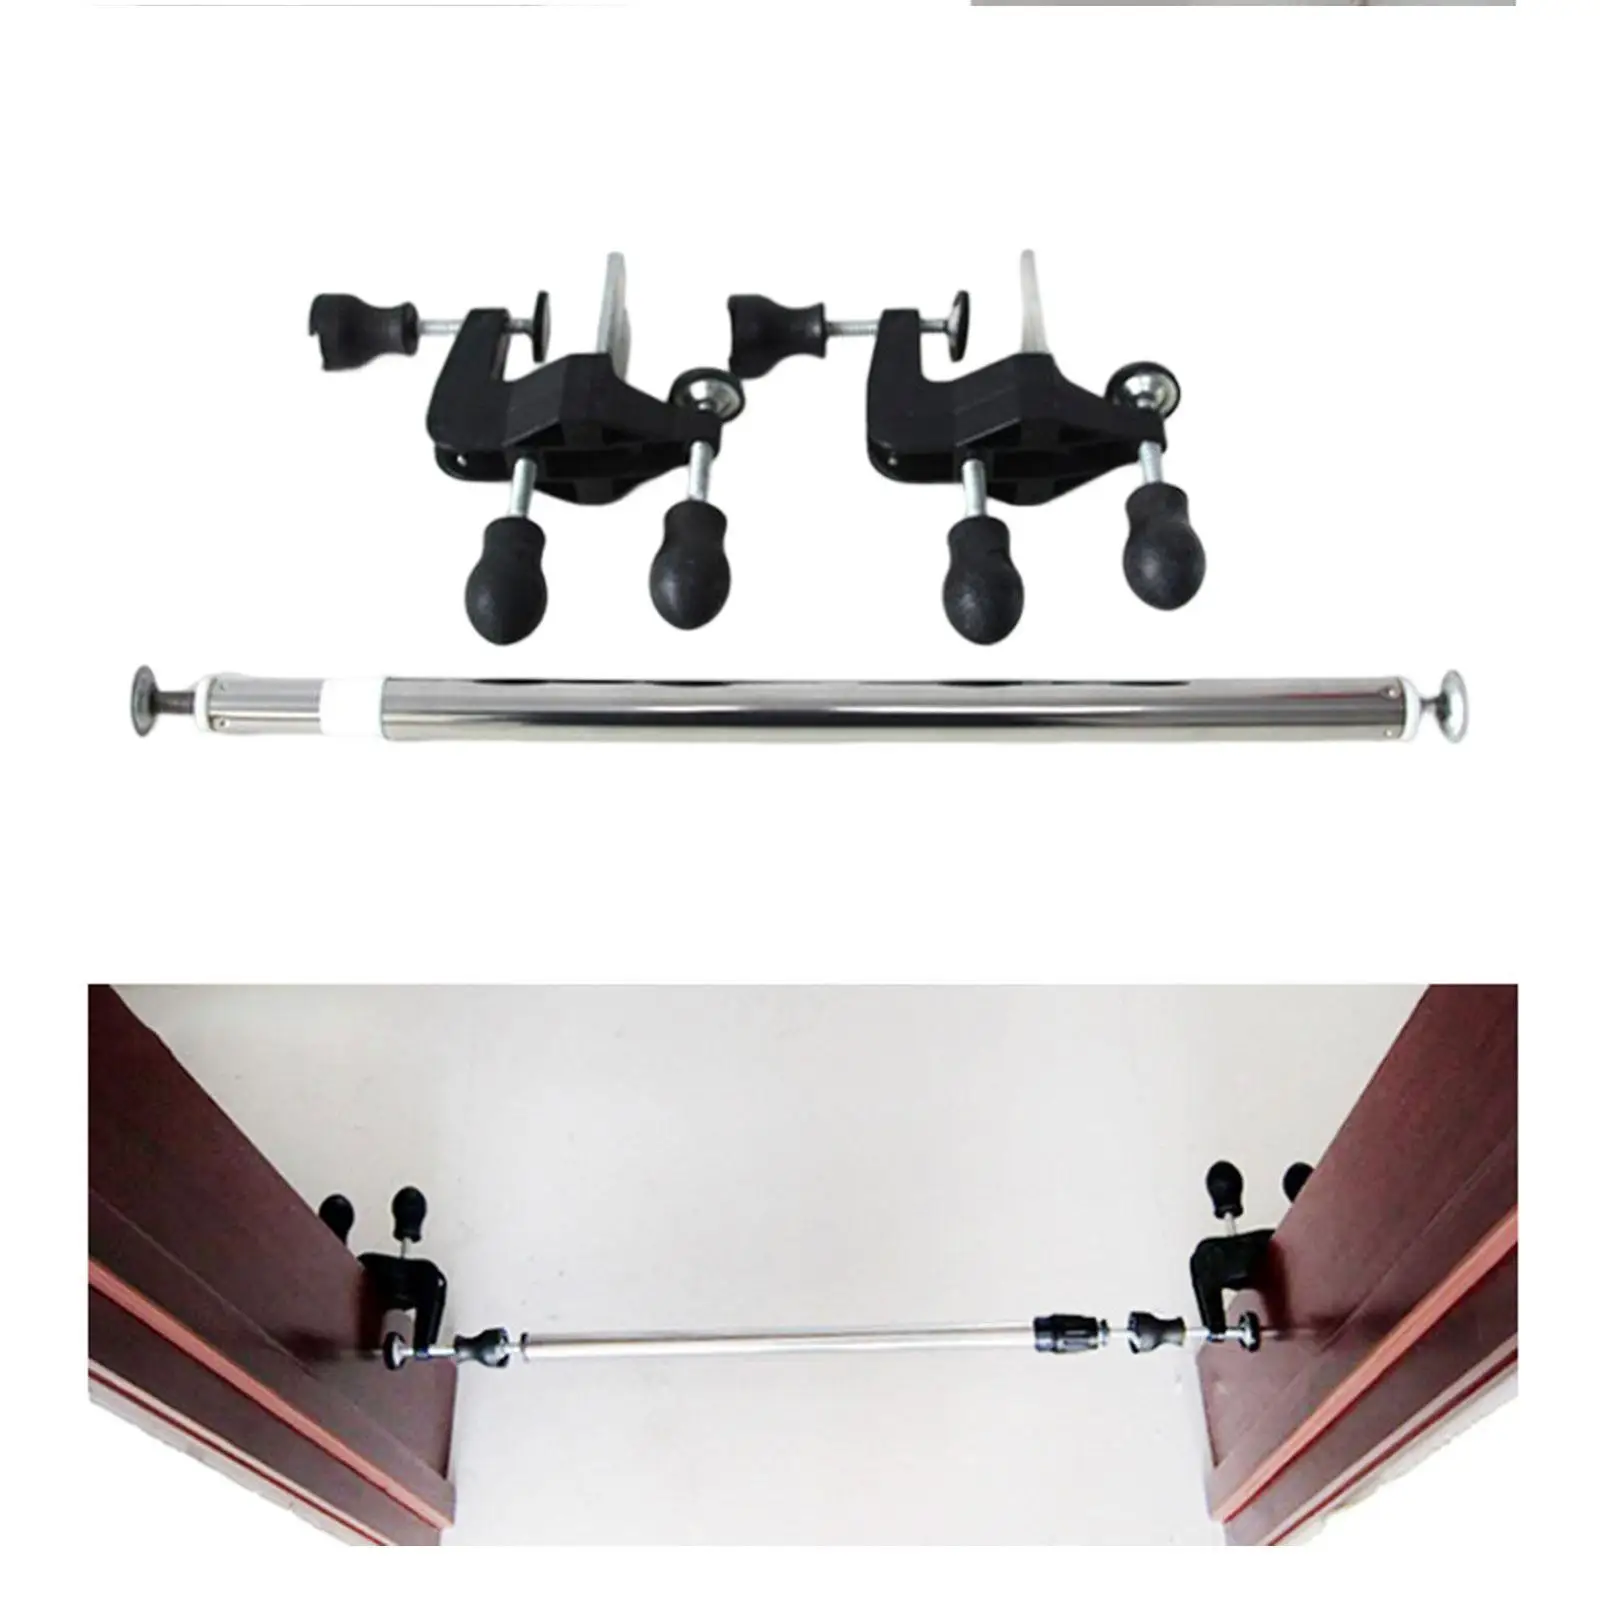 Professional Wooden Door Installer Set Stainless Steel Stainless Steel Adjustable Angle Adjuster Quick for Home Construction